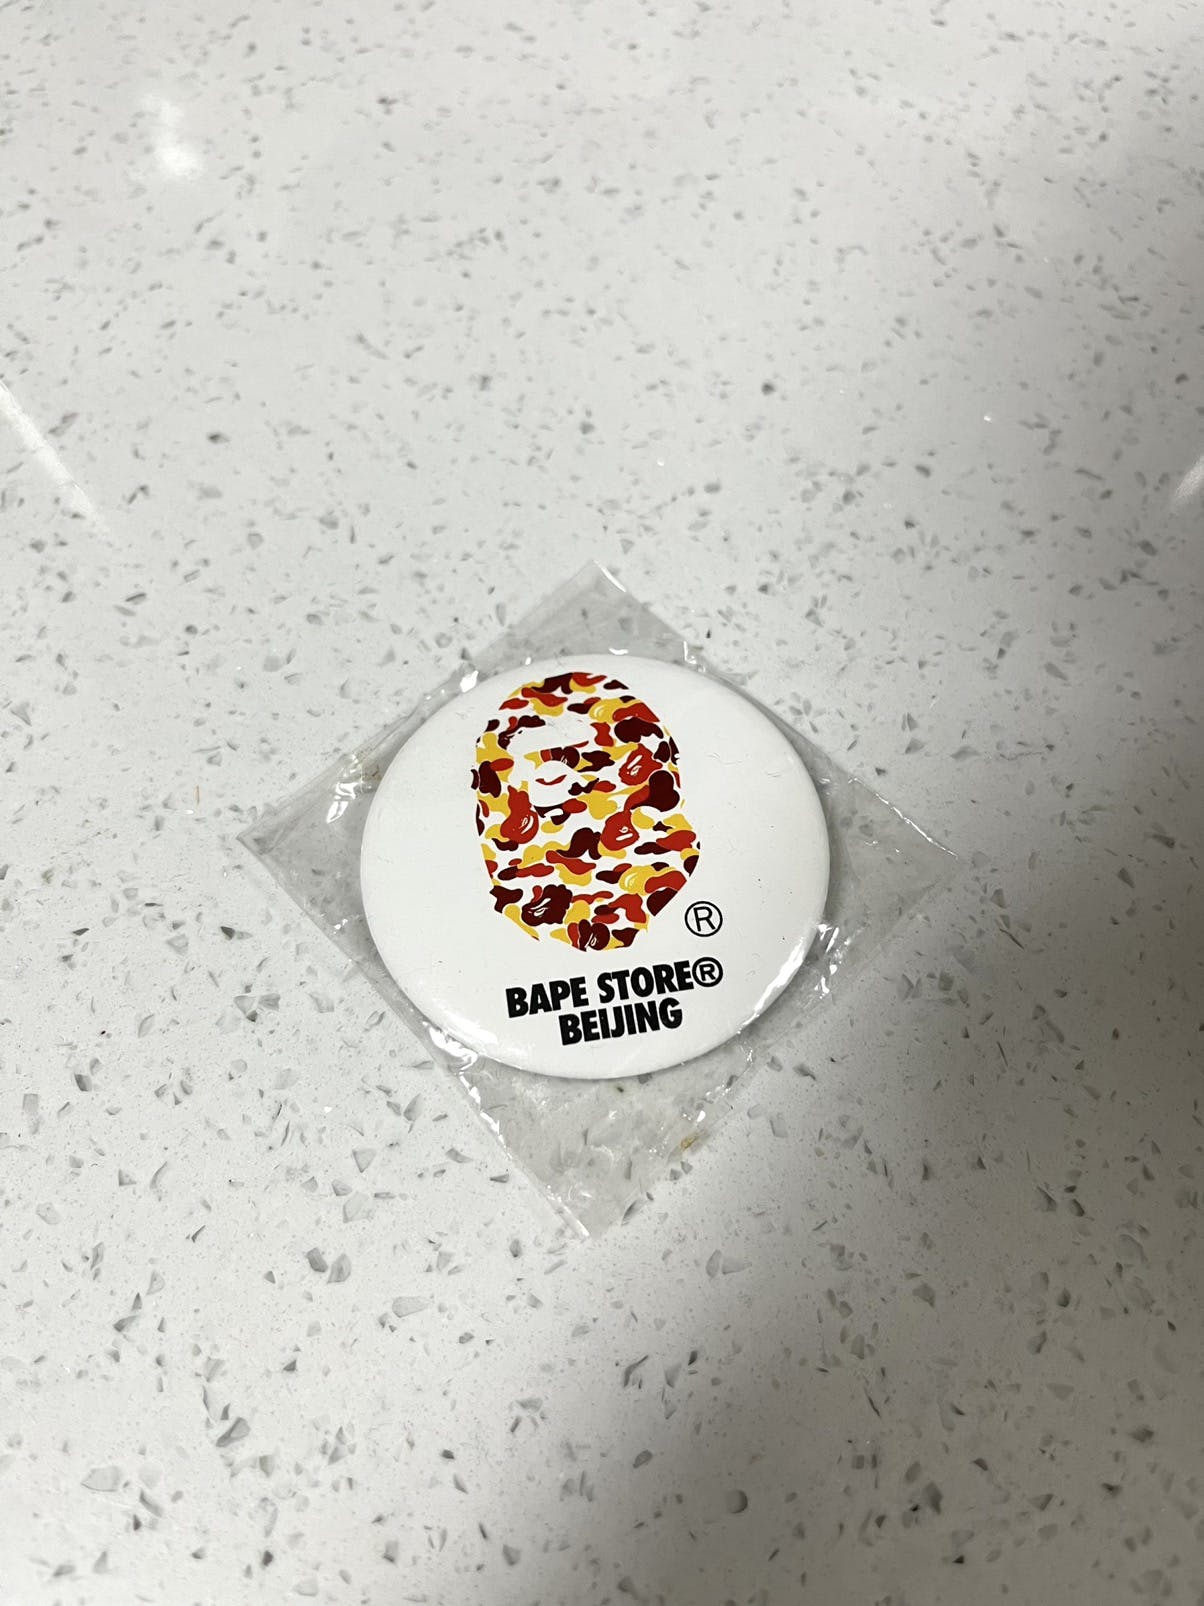 Bape Beijing Store Limited Edition Pins From 2010 - 1